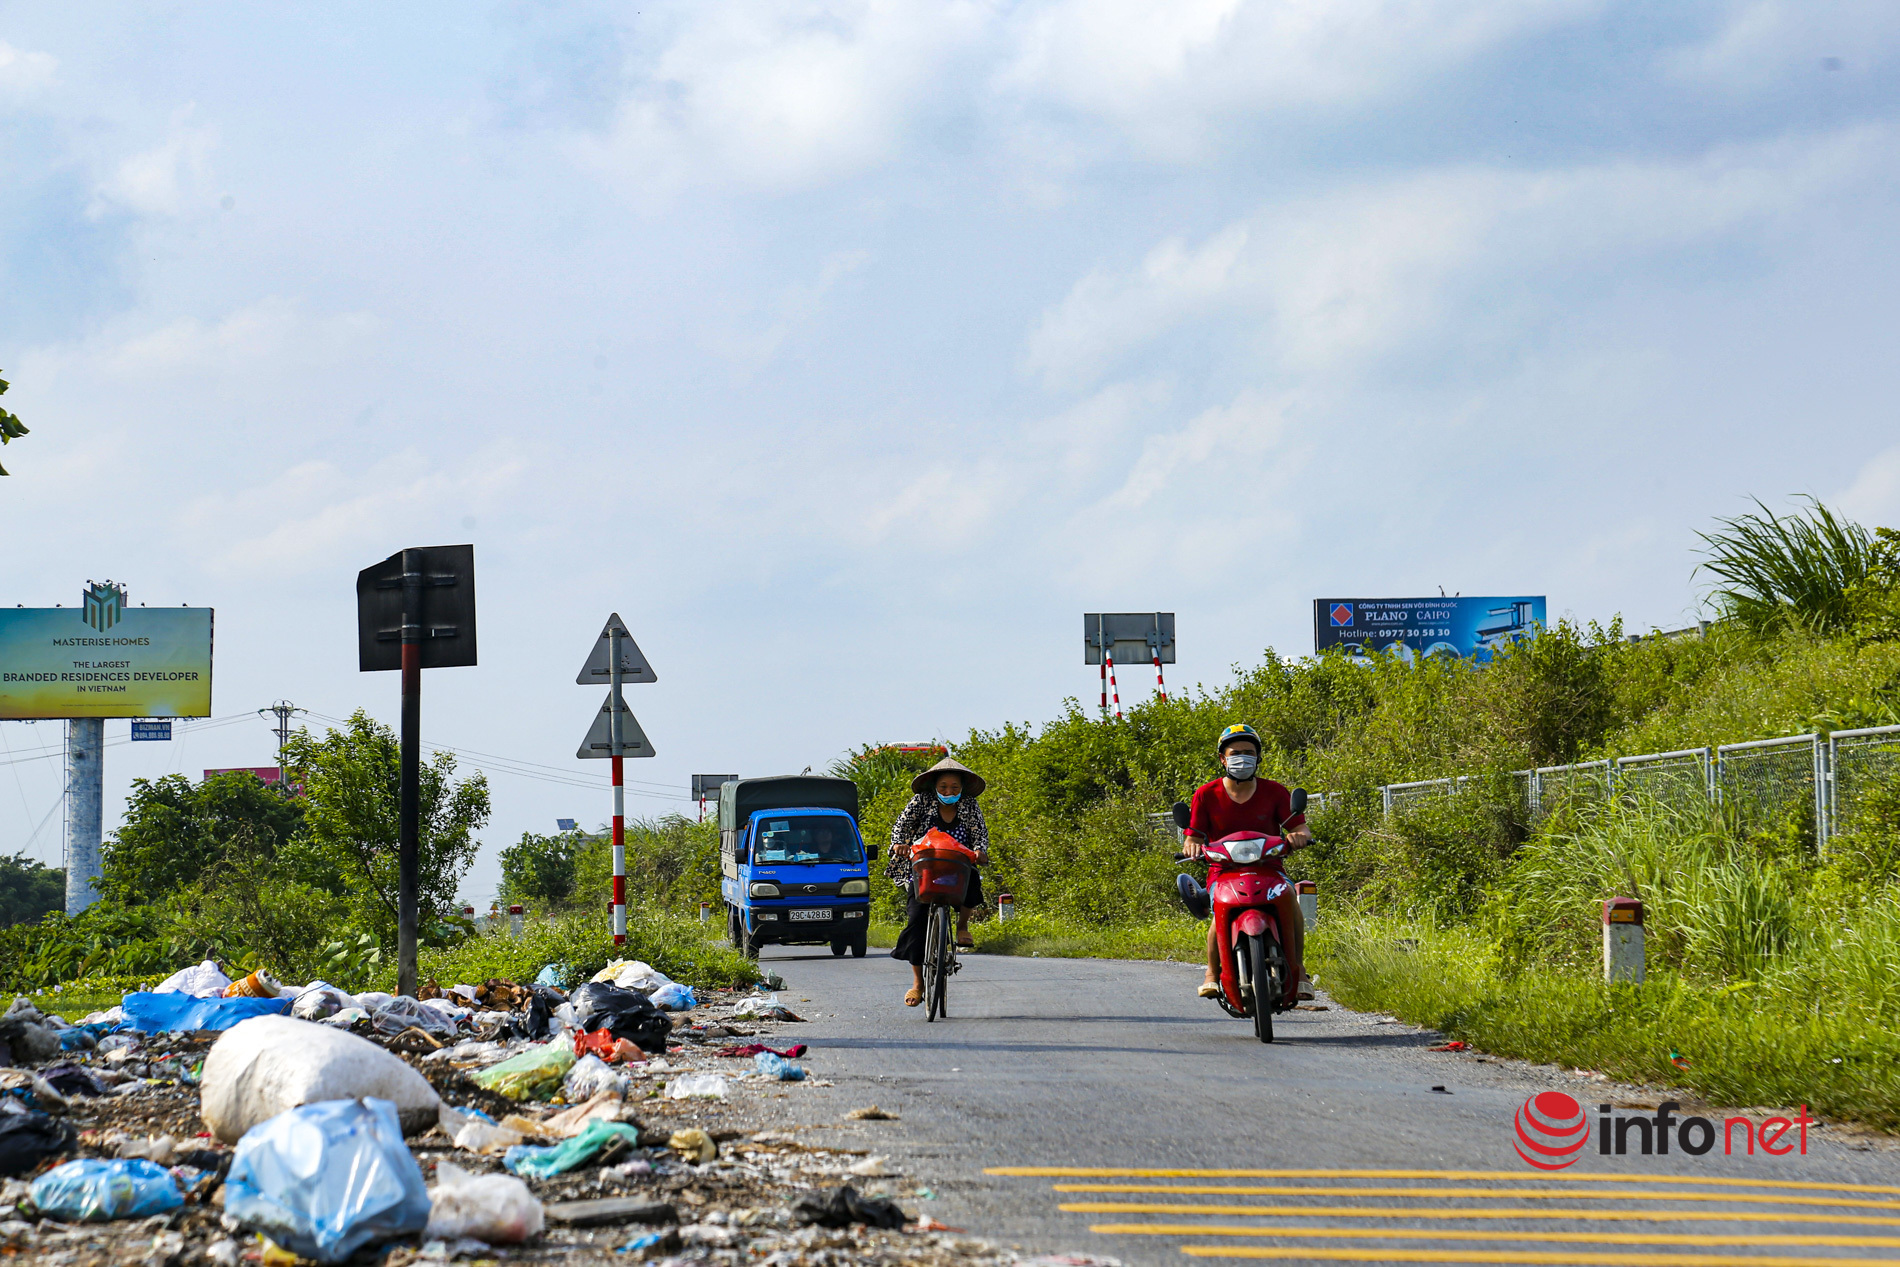 Garbage surrounds Phap Van - Cau Gie highway, people 500m away can't stand the stench.